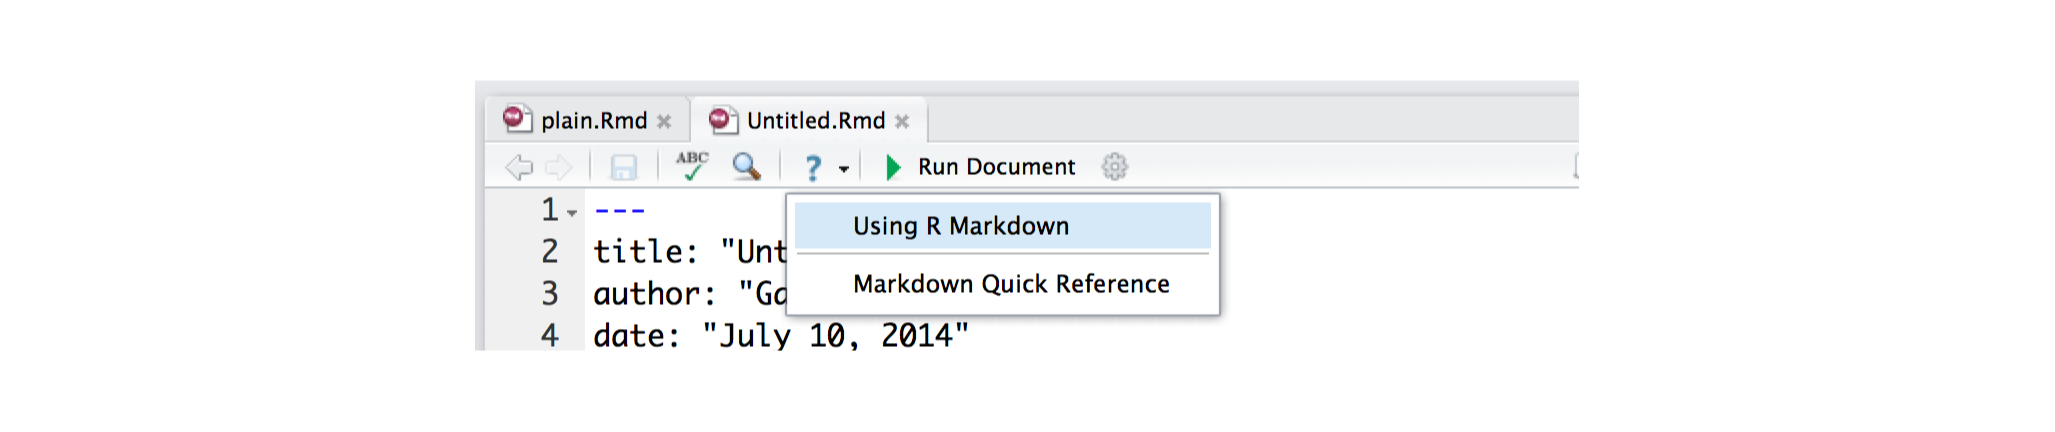 Drop down menu from the question mark in the RStudio IDE that includes Using R Markdown and Markdown Quick Reference